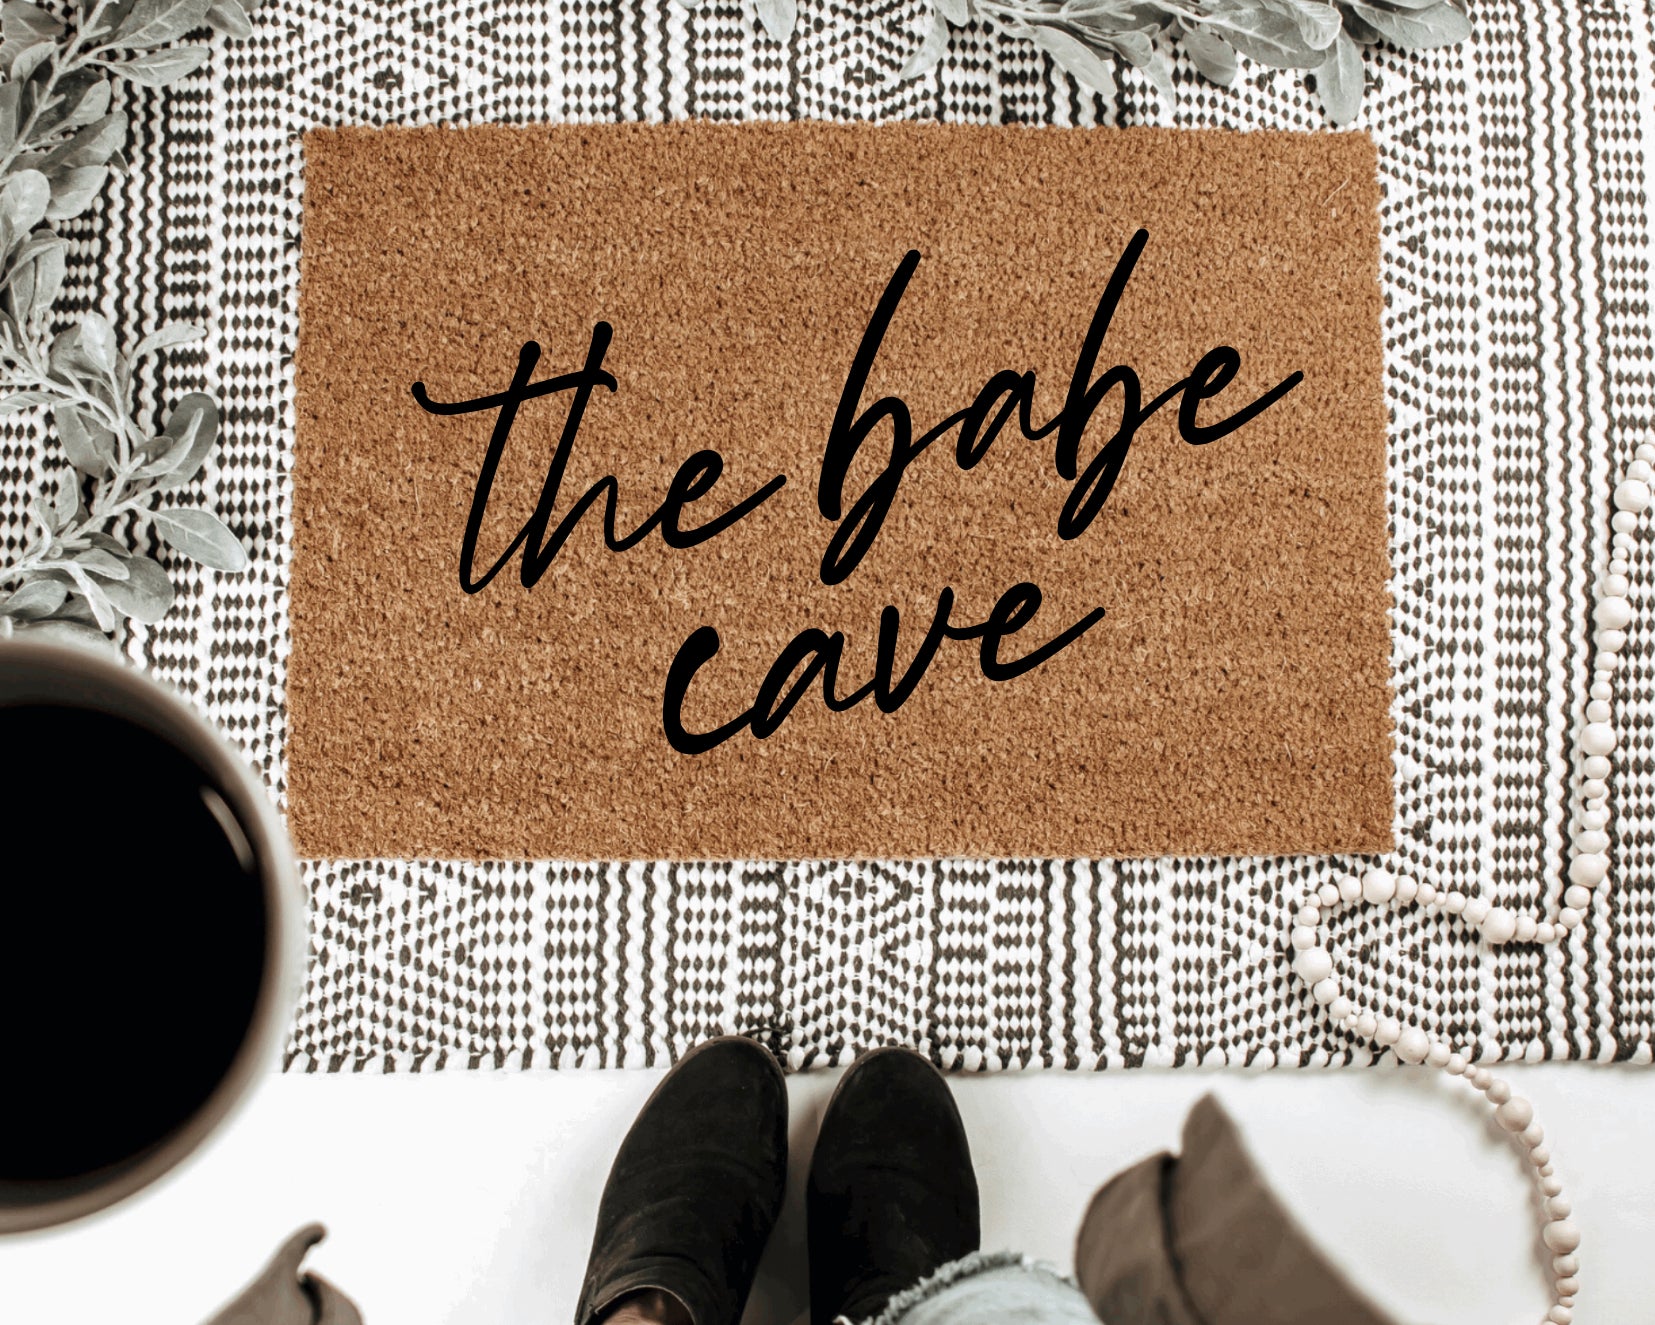 The Babe Cave